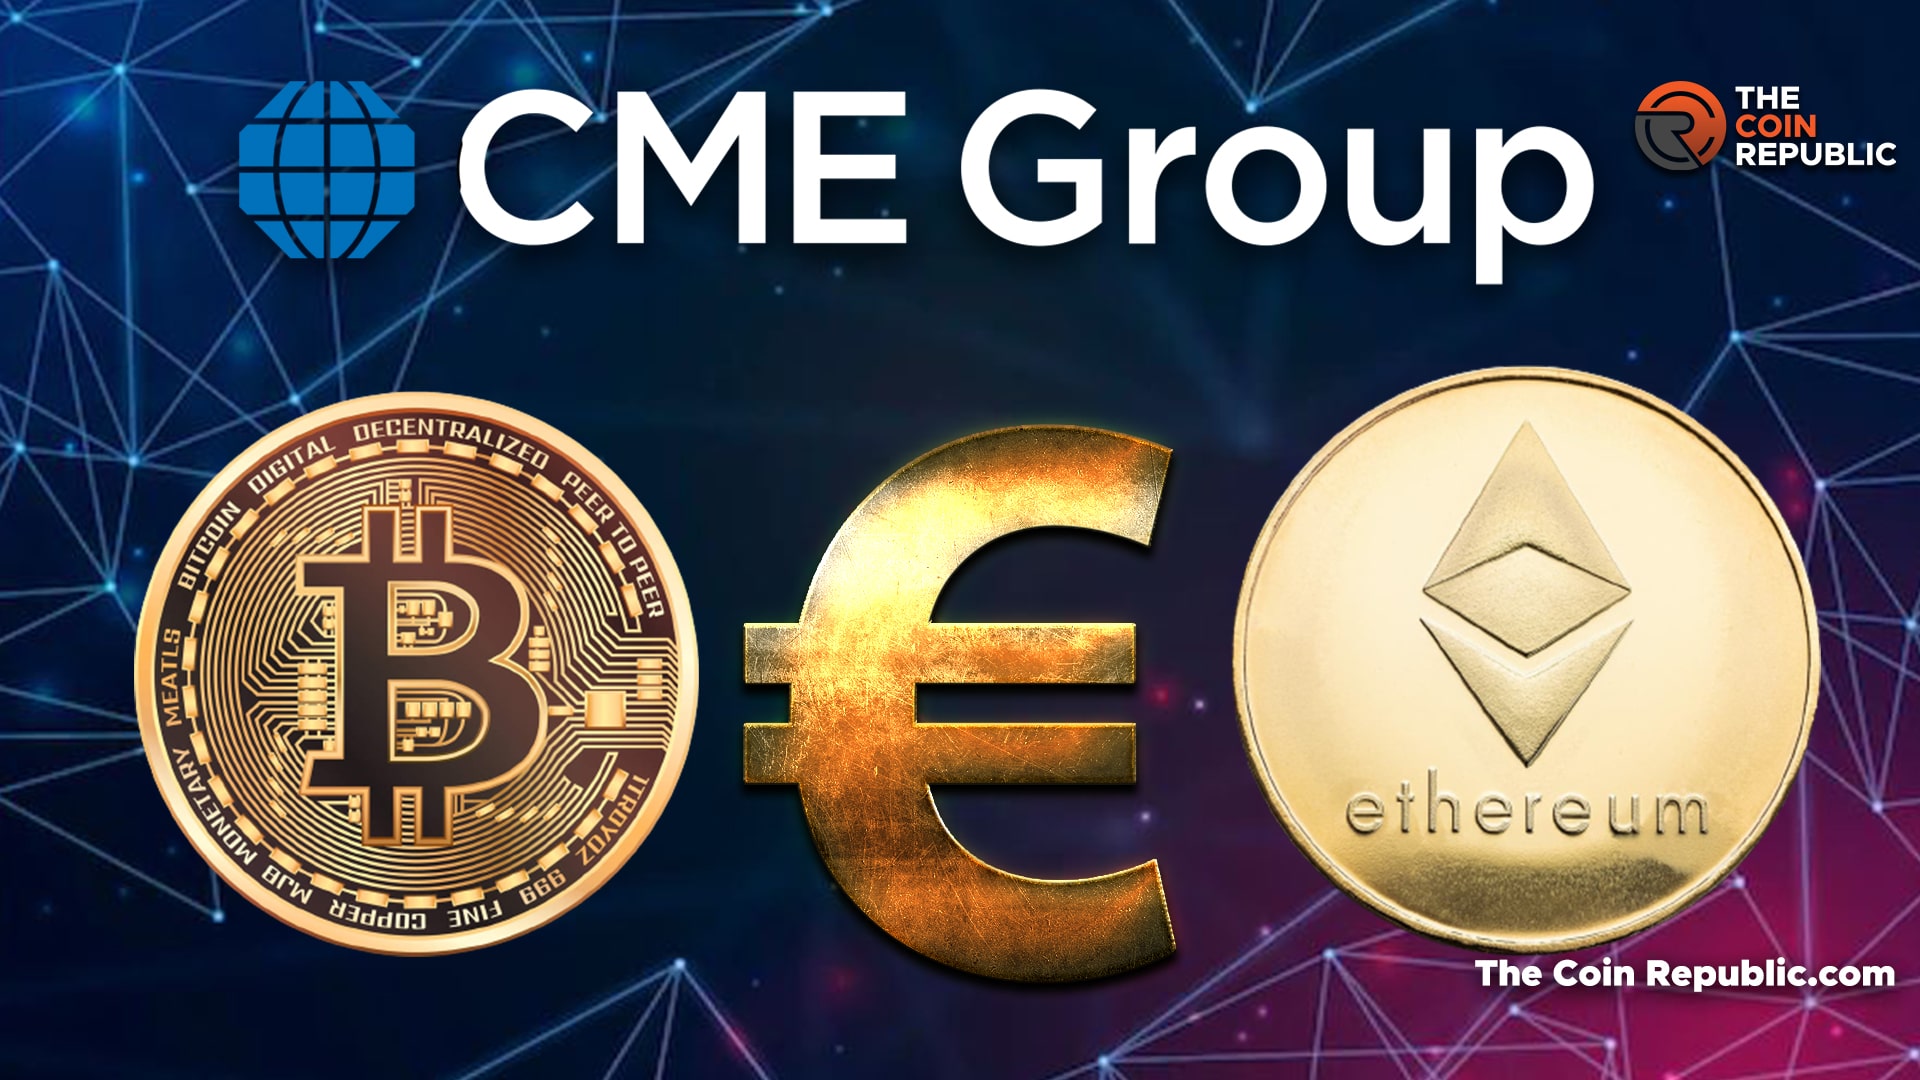 Cme cryptocurrency forex trading jobs in pakistan railway